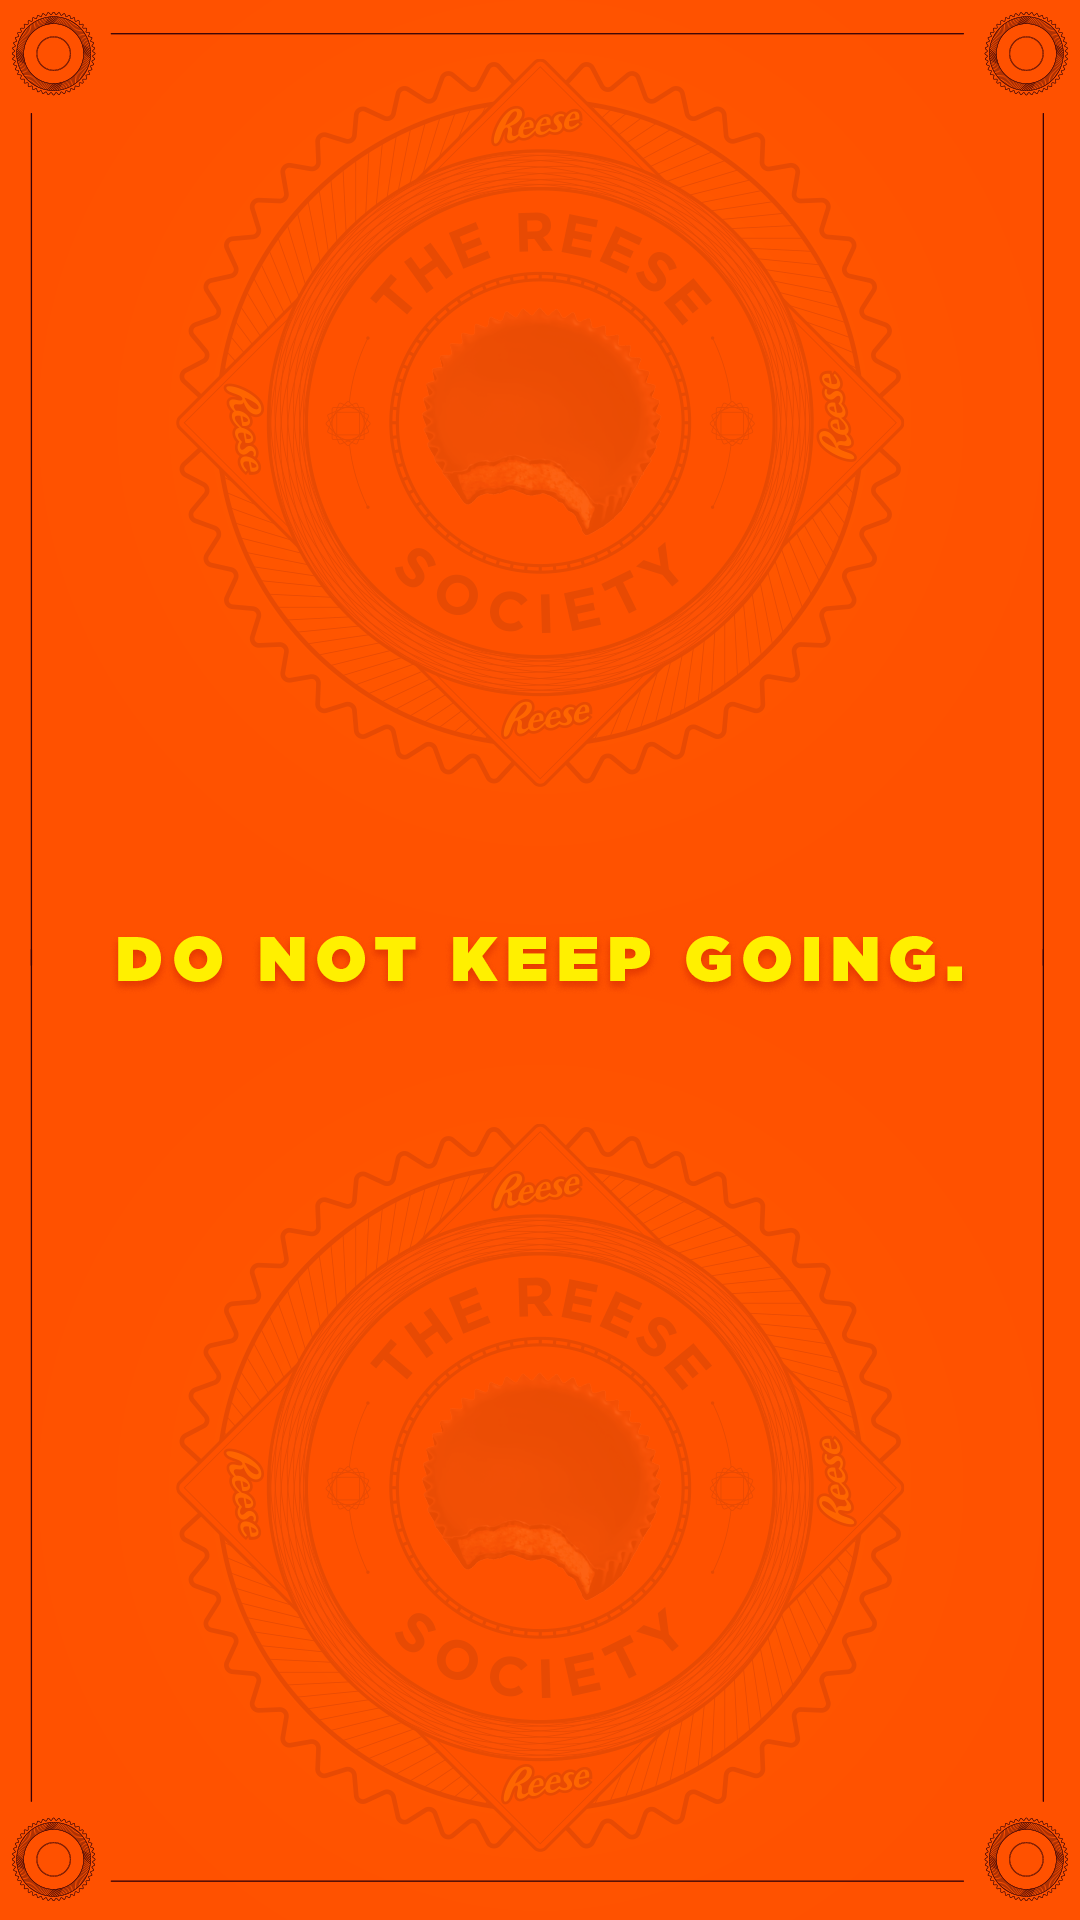 Reese-Society-IG_0056_Do-not-keep-going.png